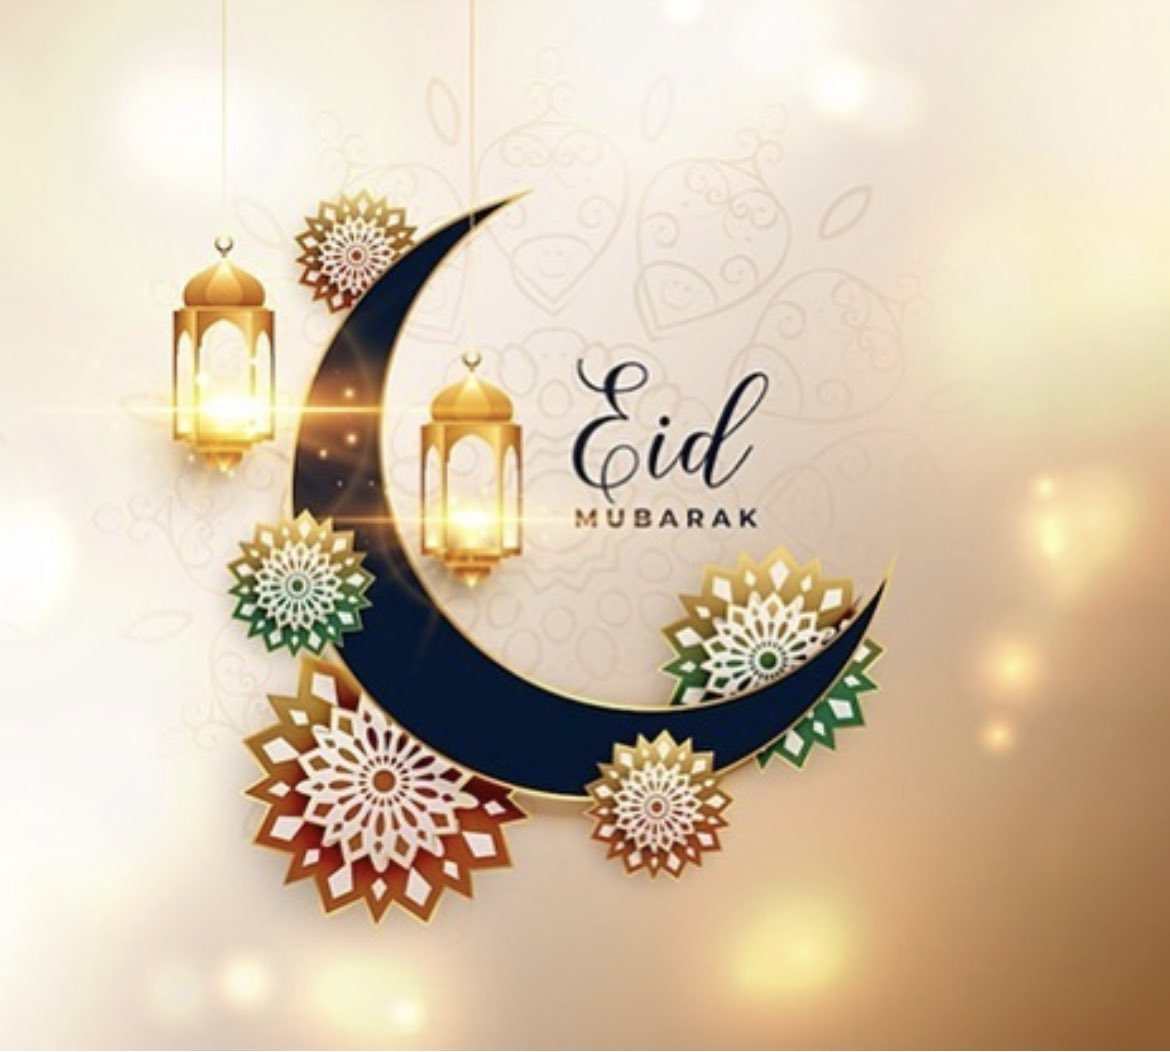 Eid Mubarak to all of our families who are celebrating.